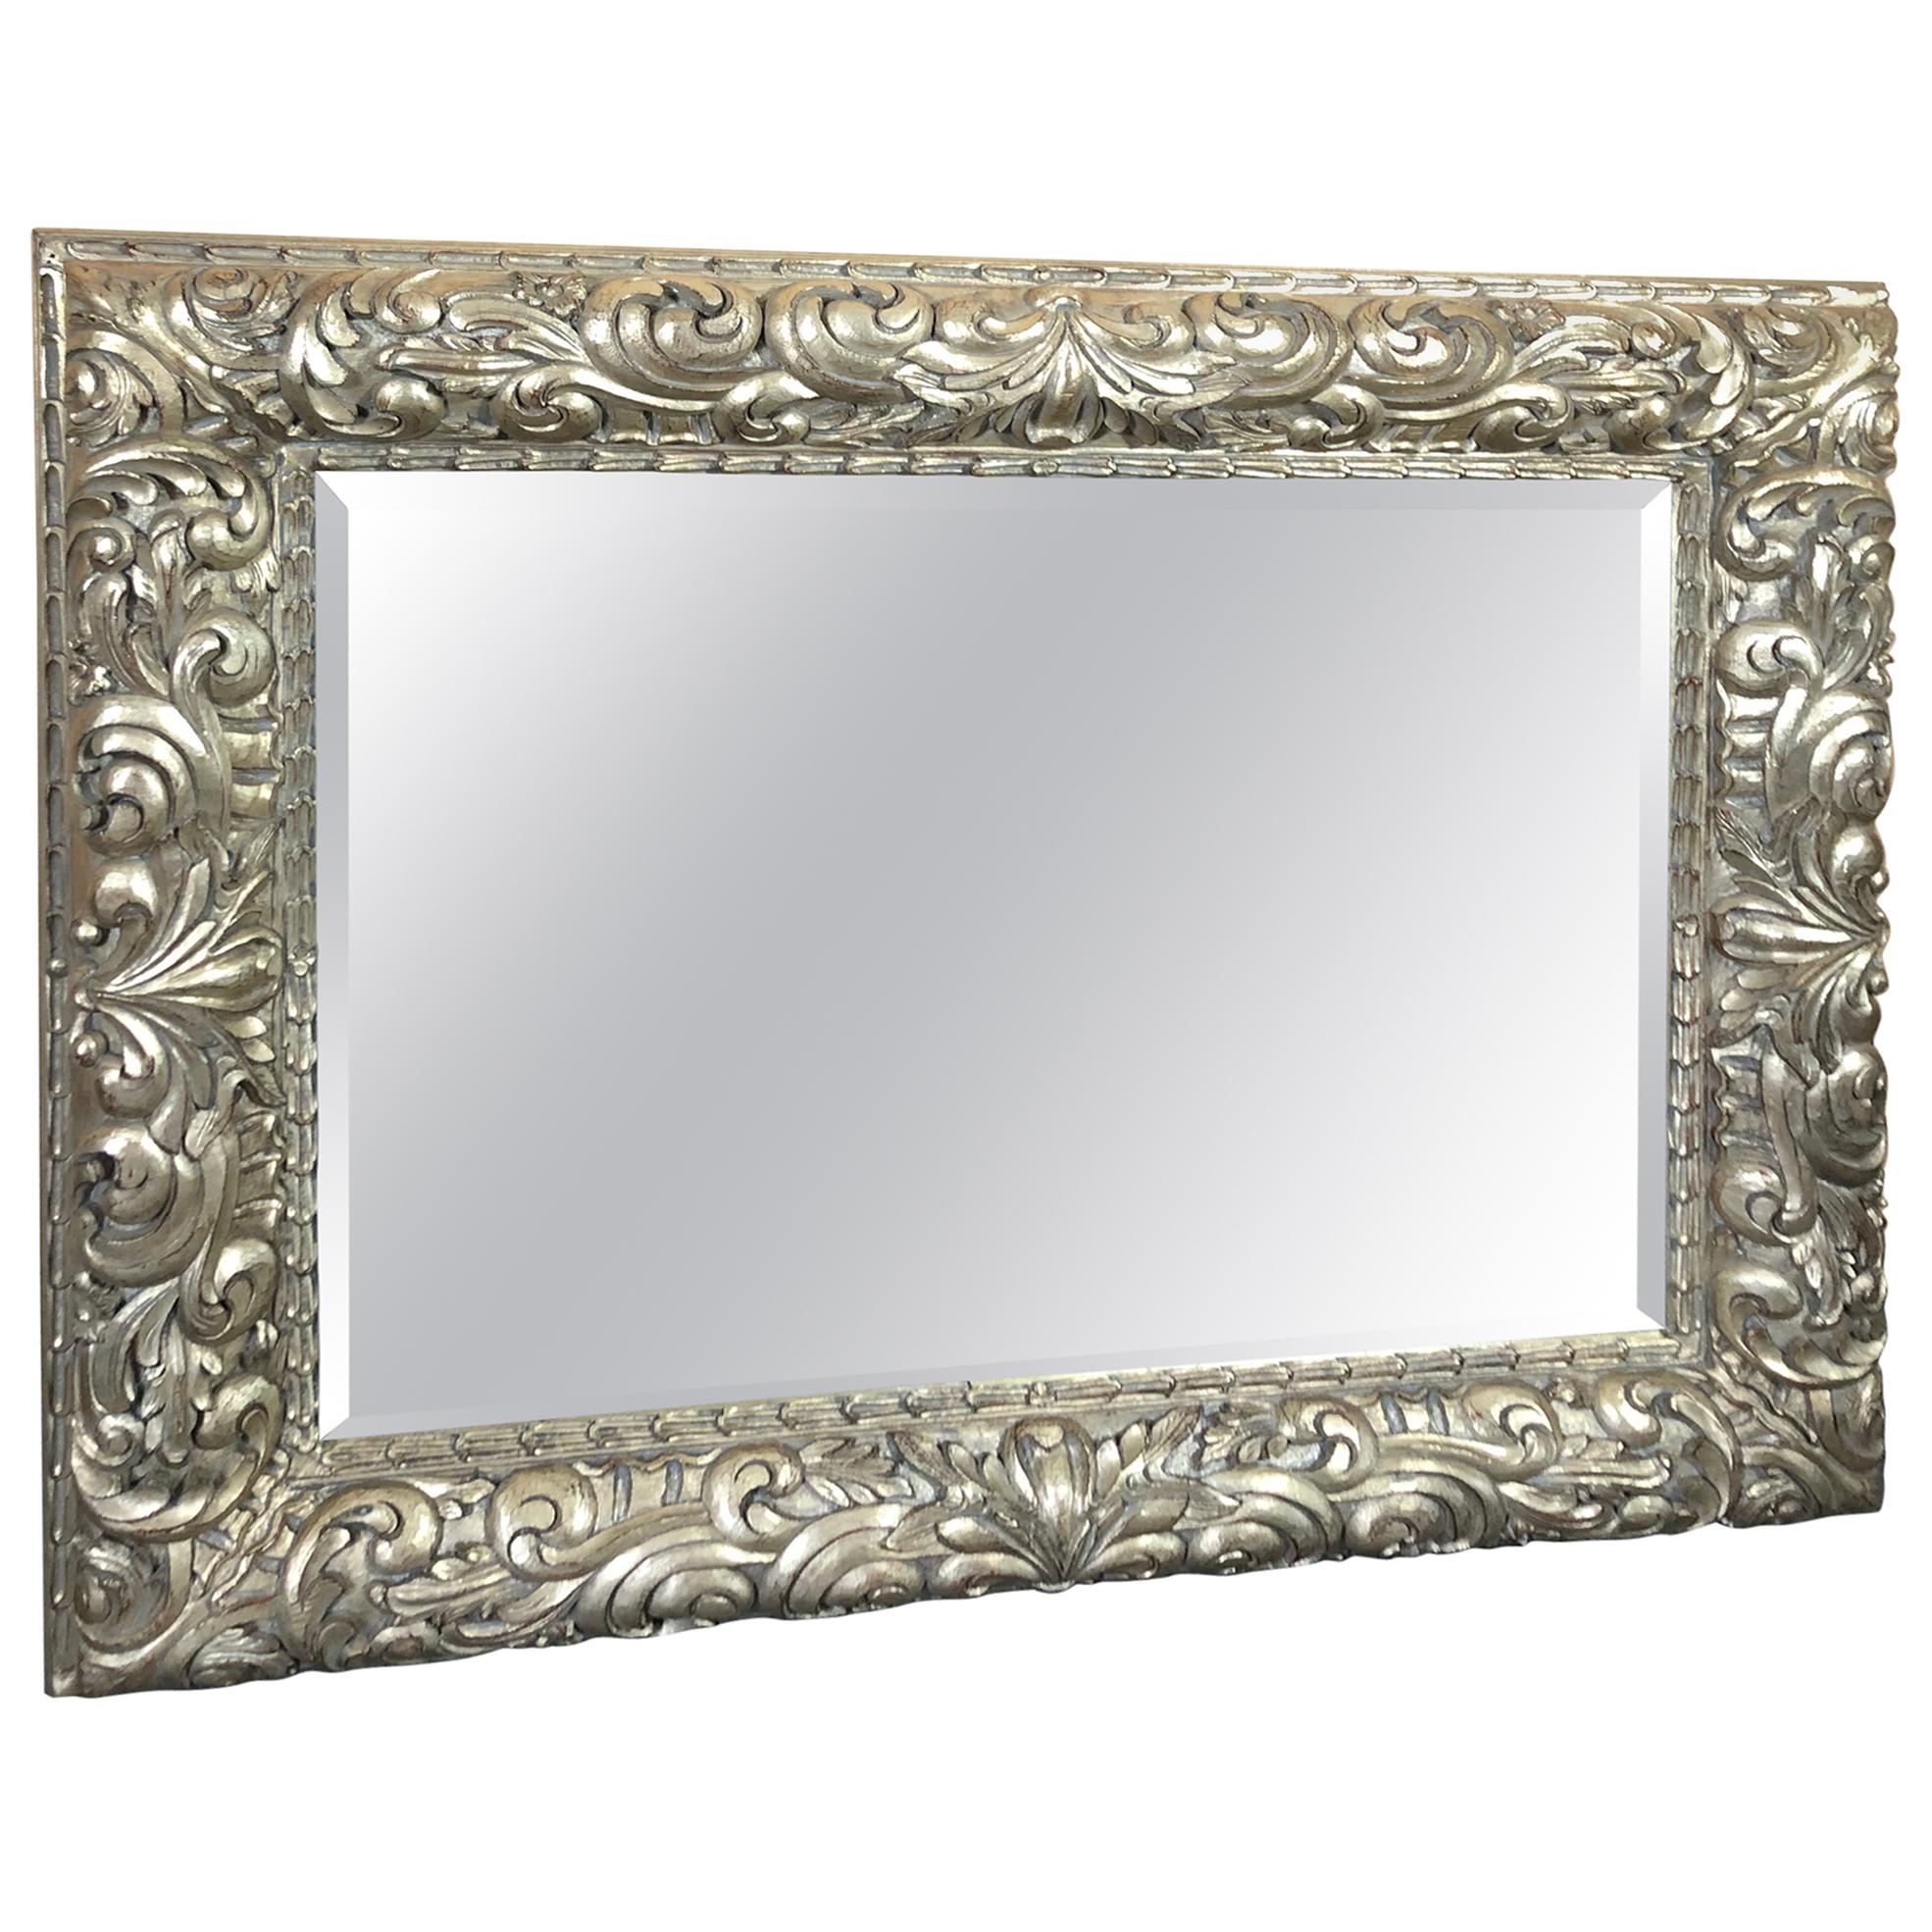 Very Large Ornately Carved Silver Leaf Horizontal Rectangular Mirror For Sale